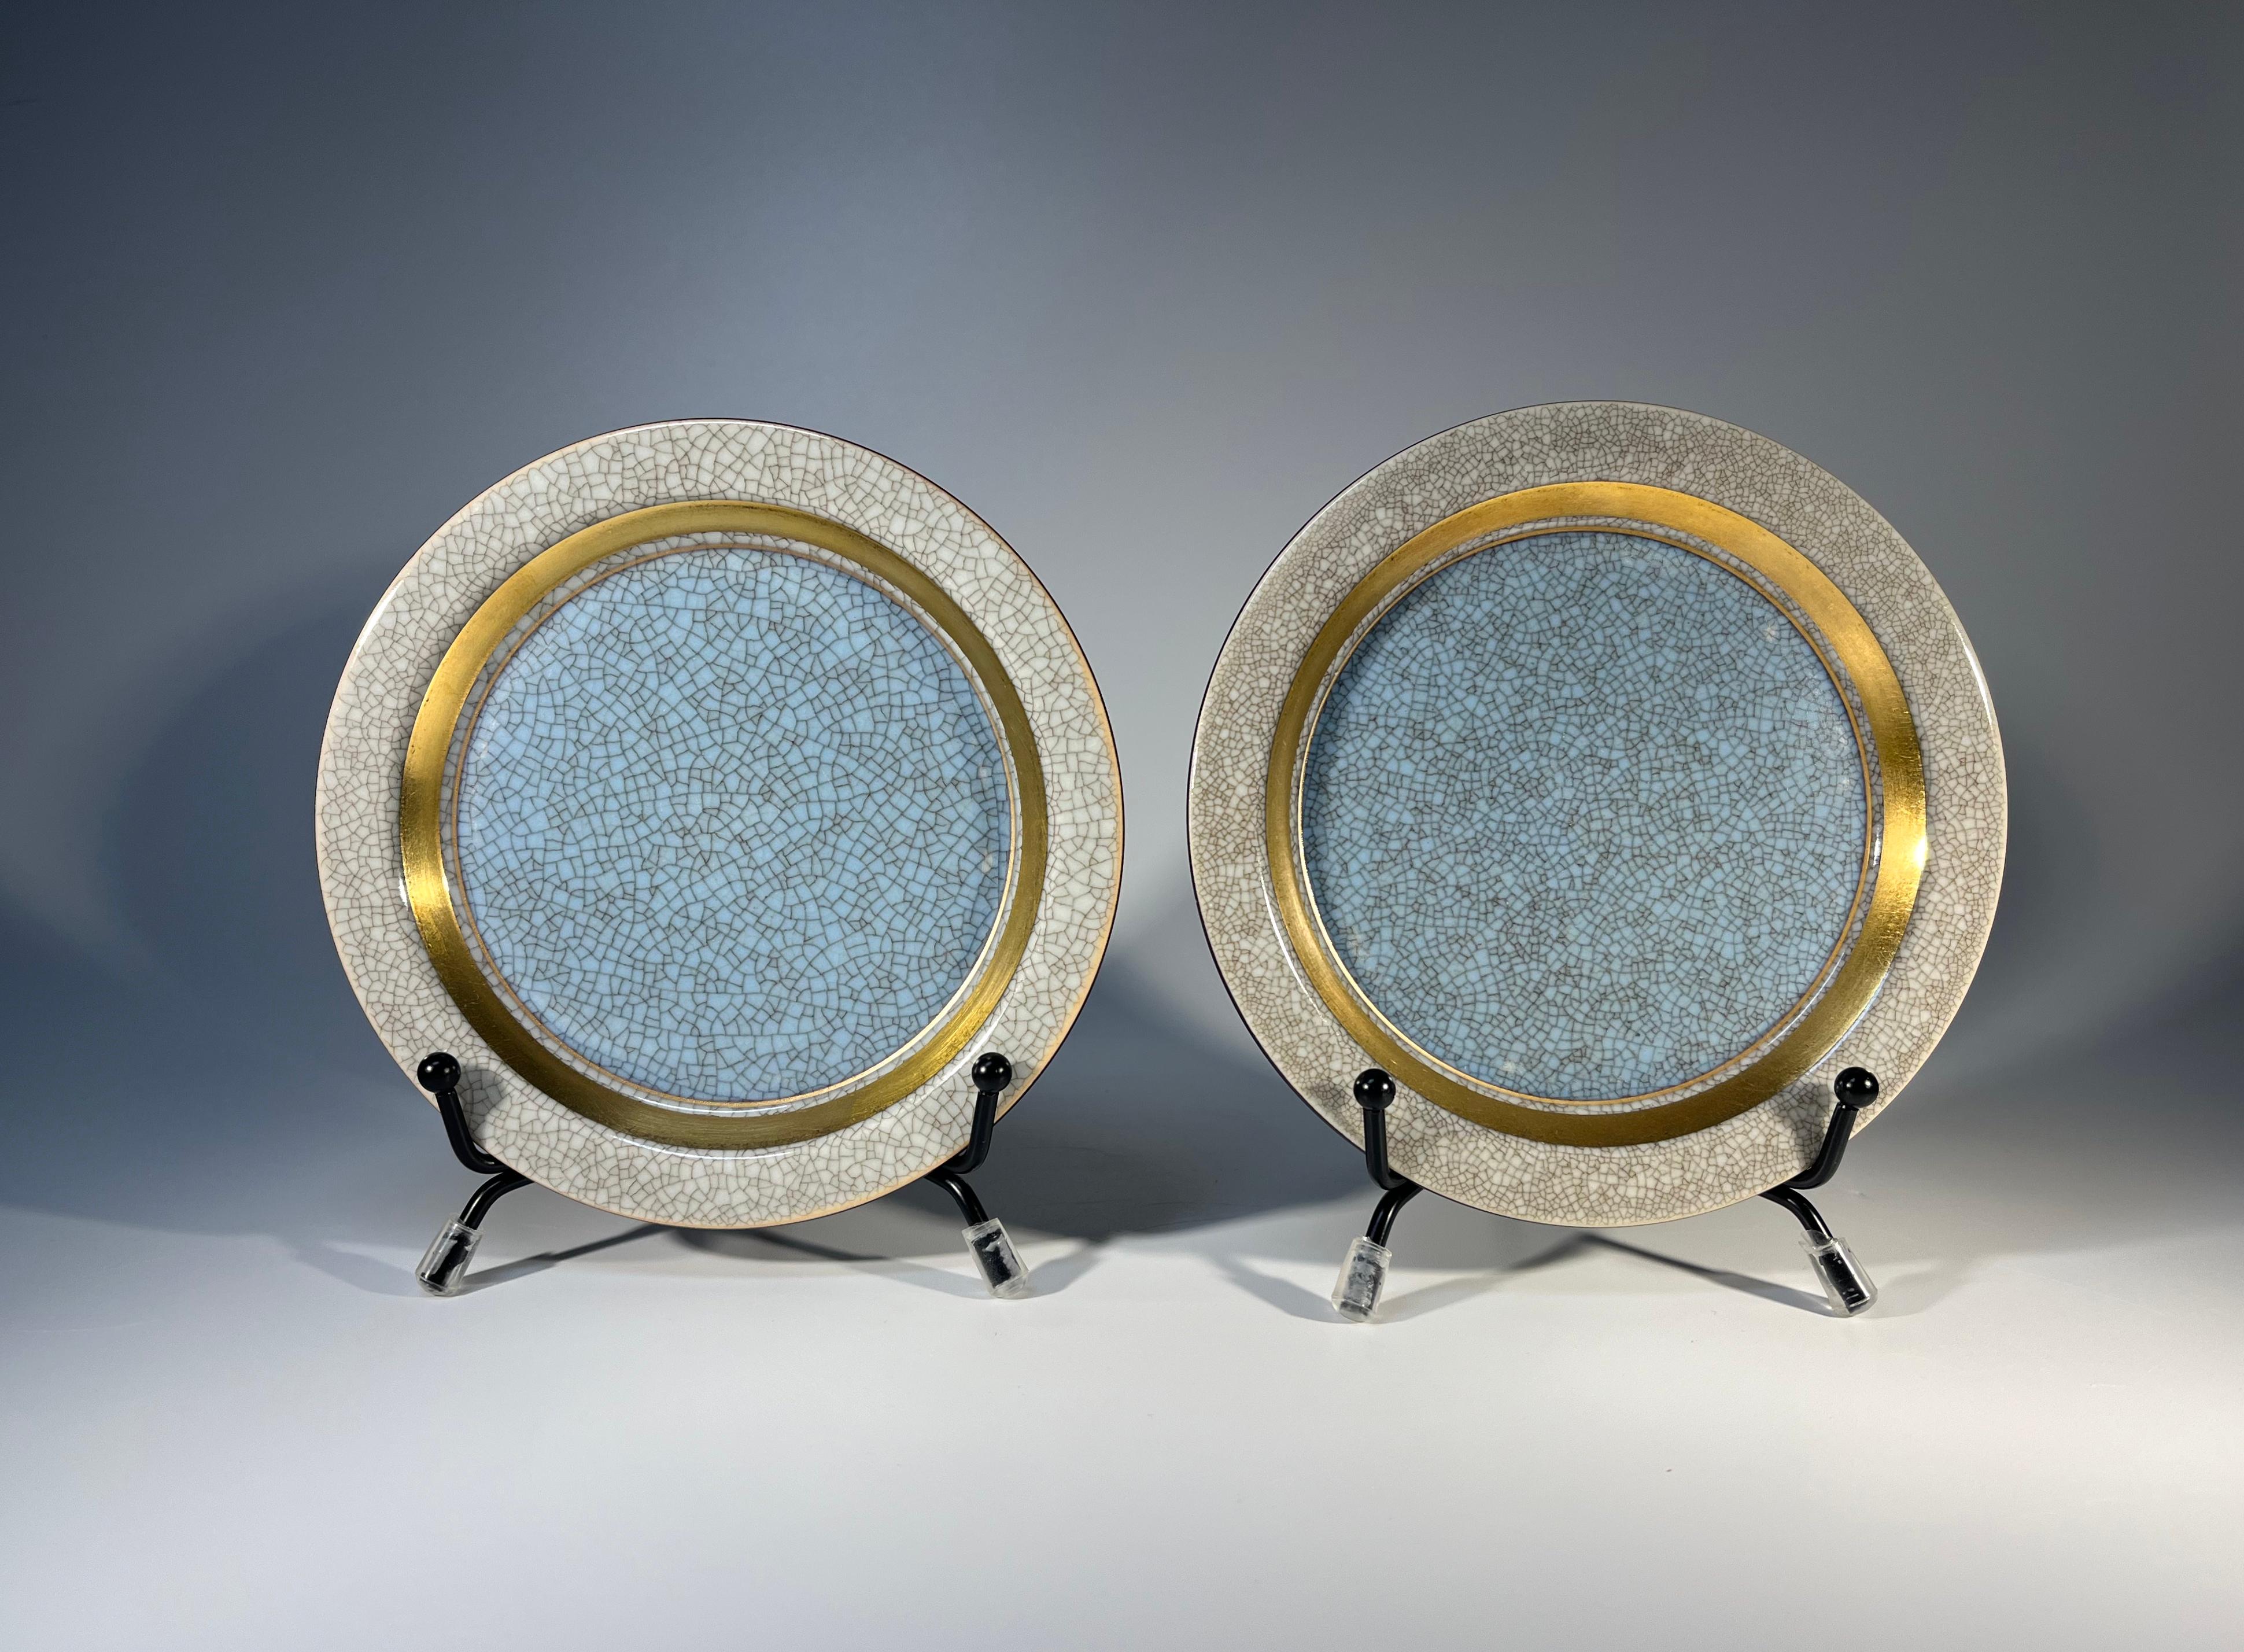 A lovely pair of Thorkild Olsen powder blue and gilt porcelain Royal Copenhagen crackle pin trays.
Grey crackle glaze to outer rim and reverse
Both have same year date stamp
Circa 1963
Signed and numbered 3010
Height 0.5 inch, Diameter 4.75 inch
In